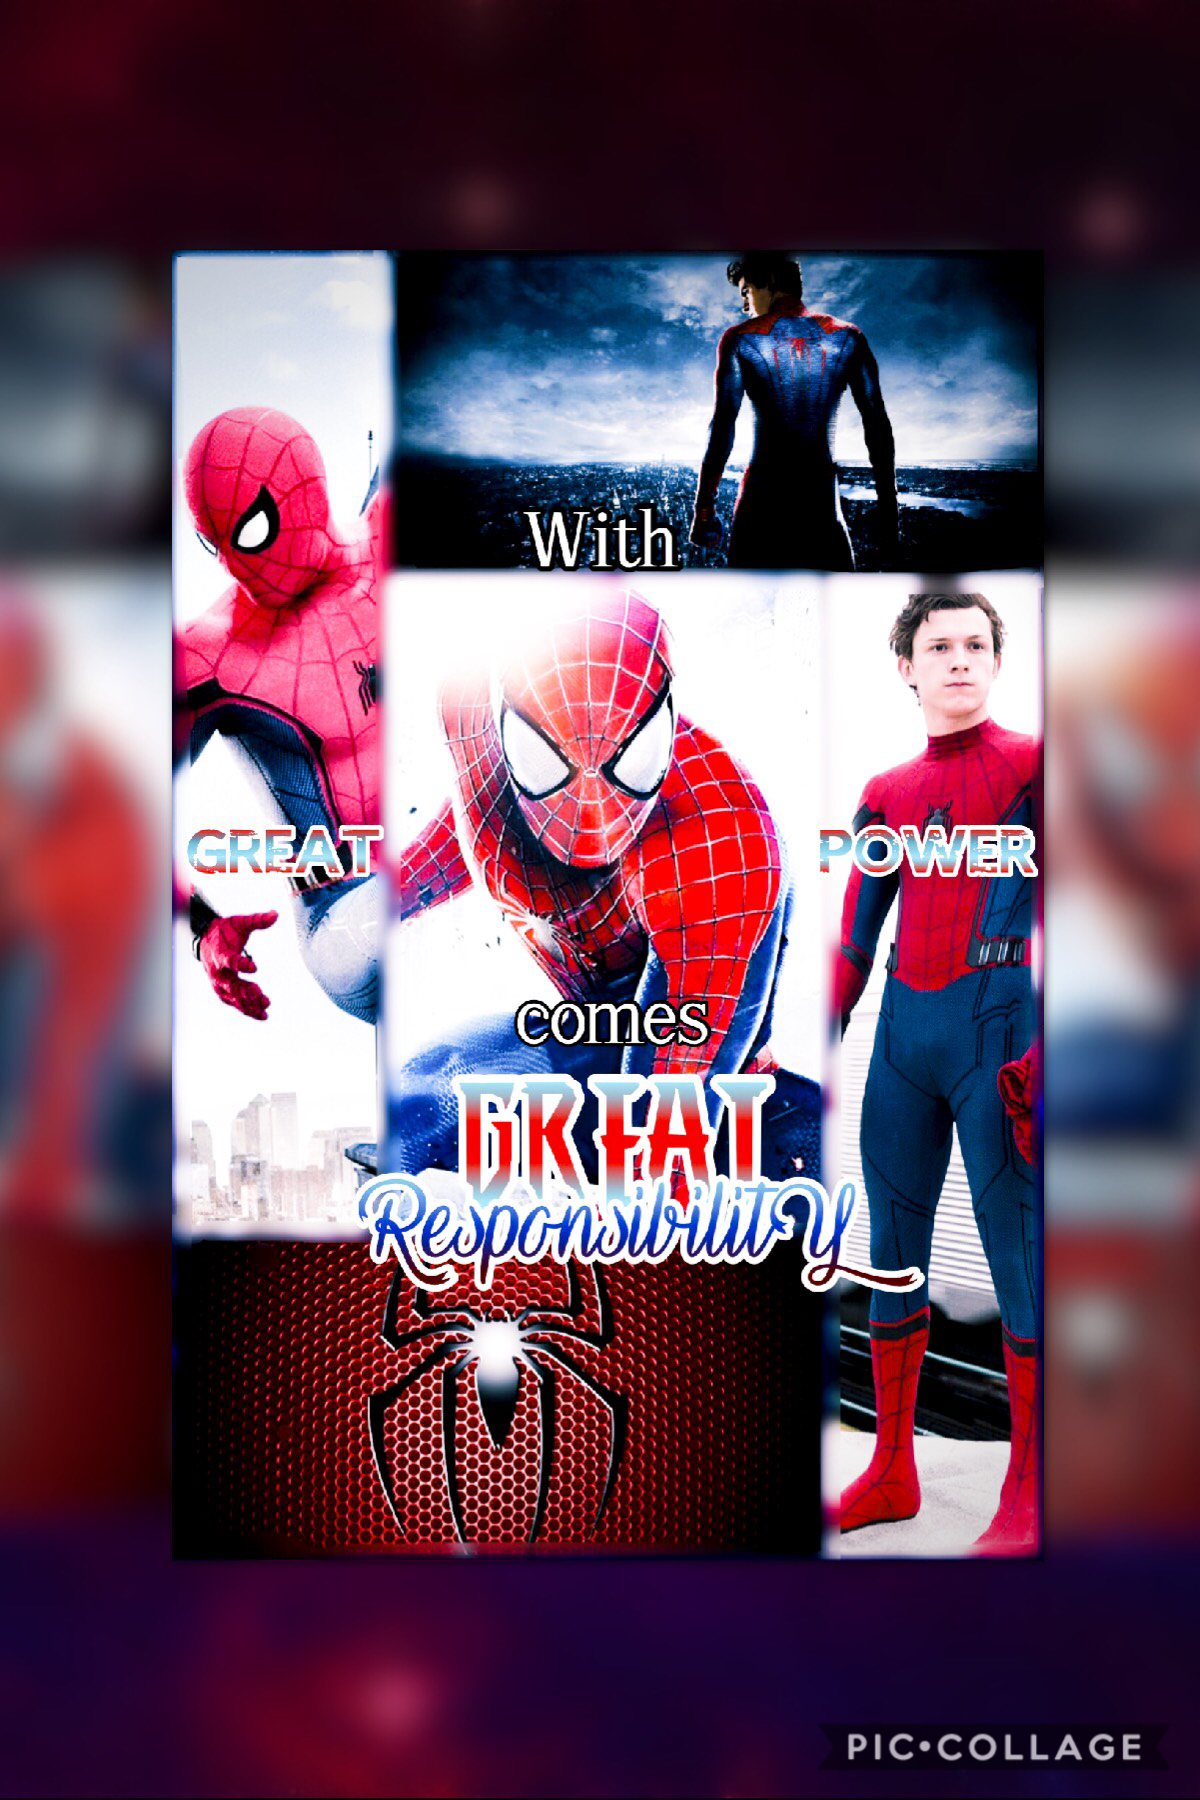 🕷Tap!🕷

Continuing my Marvel theme with your friendly neighborhood Spider-Man!
(One of my favorite Avengers!)

Please rate /10! I’d really appreciate it!